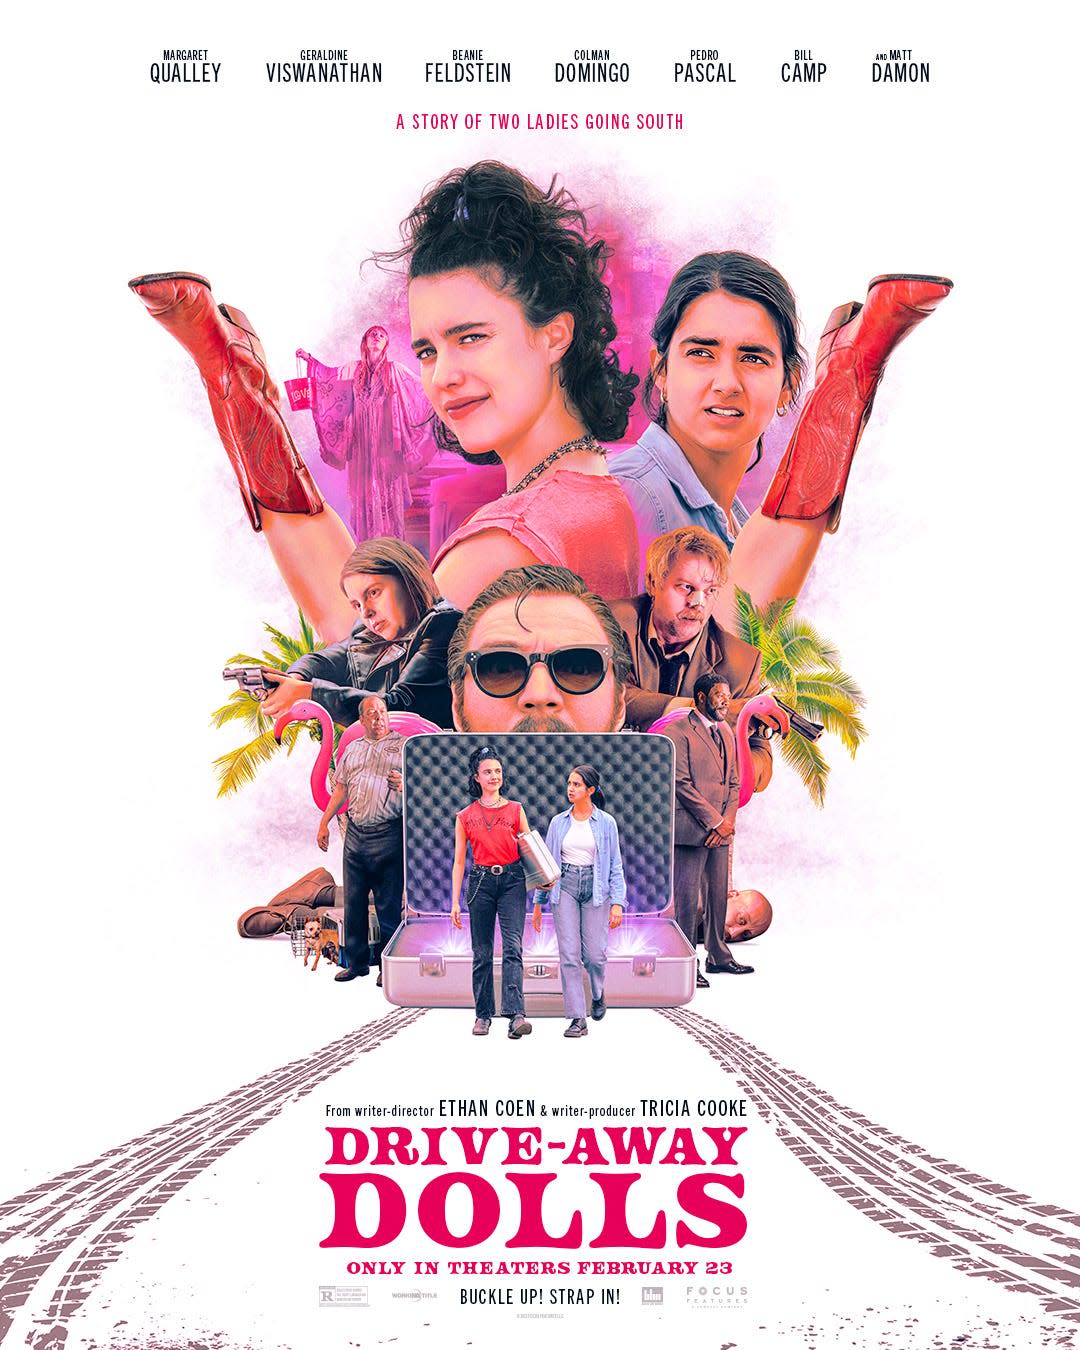 Poster for "Drive-Away Dolls" opening Feb. 23 in a theater near you.